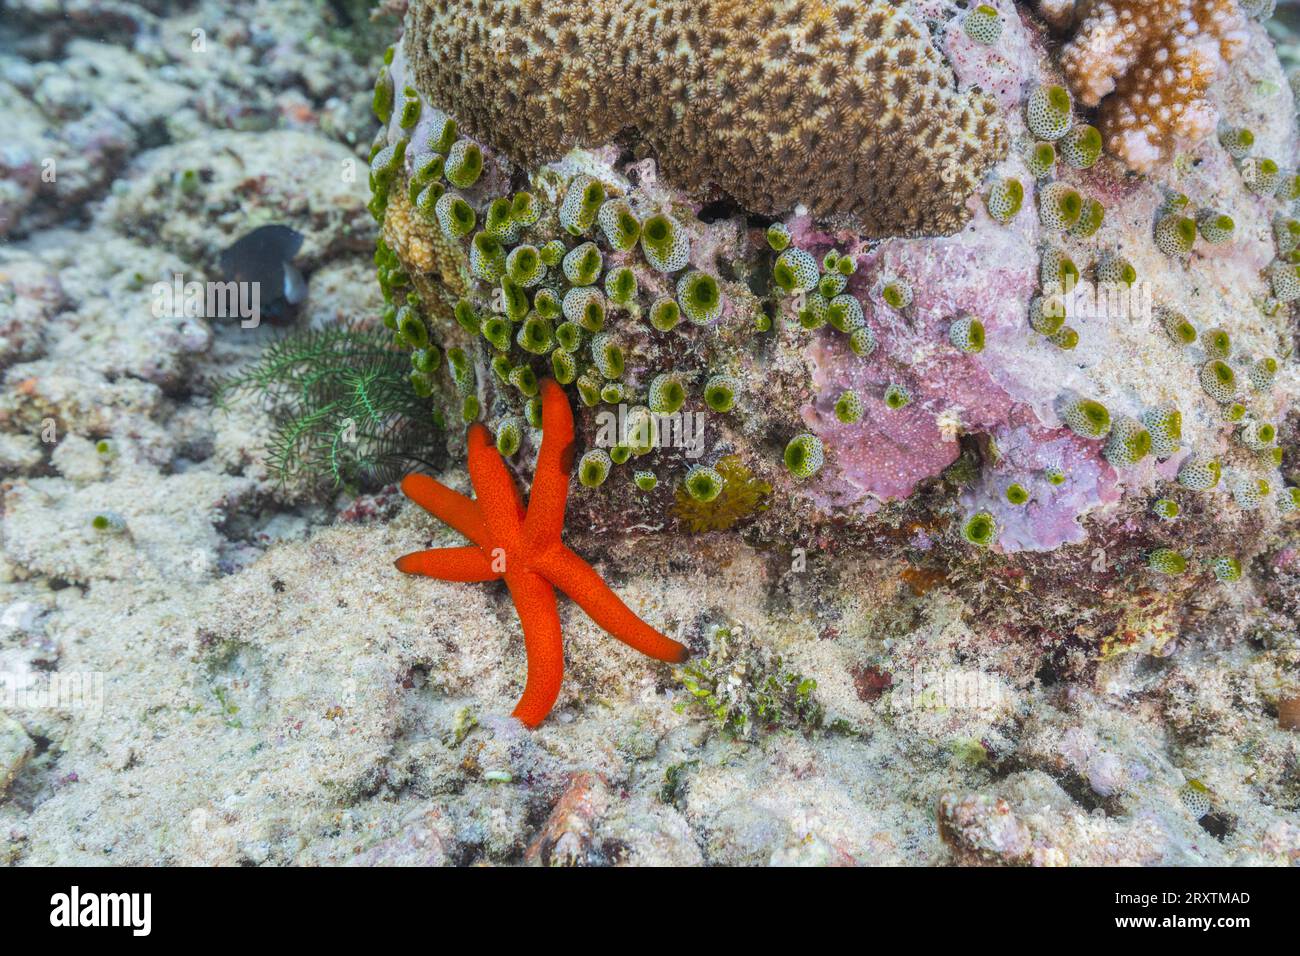 An adult Luzon sea star (Echinaster luzonicus), in the shallow reefs off Bangka Island, Indonesia, Southeast Asia, Asia Stock Photo